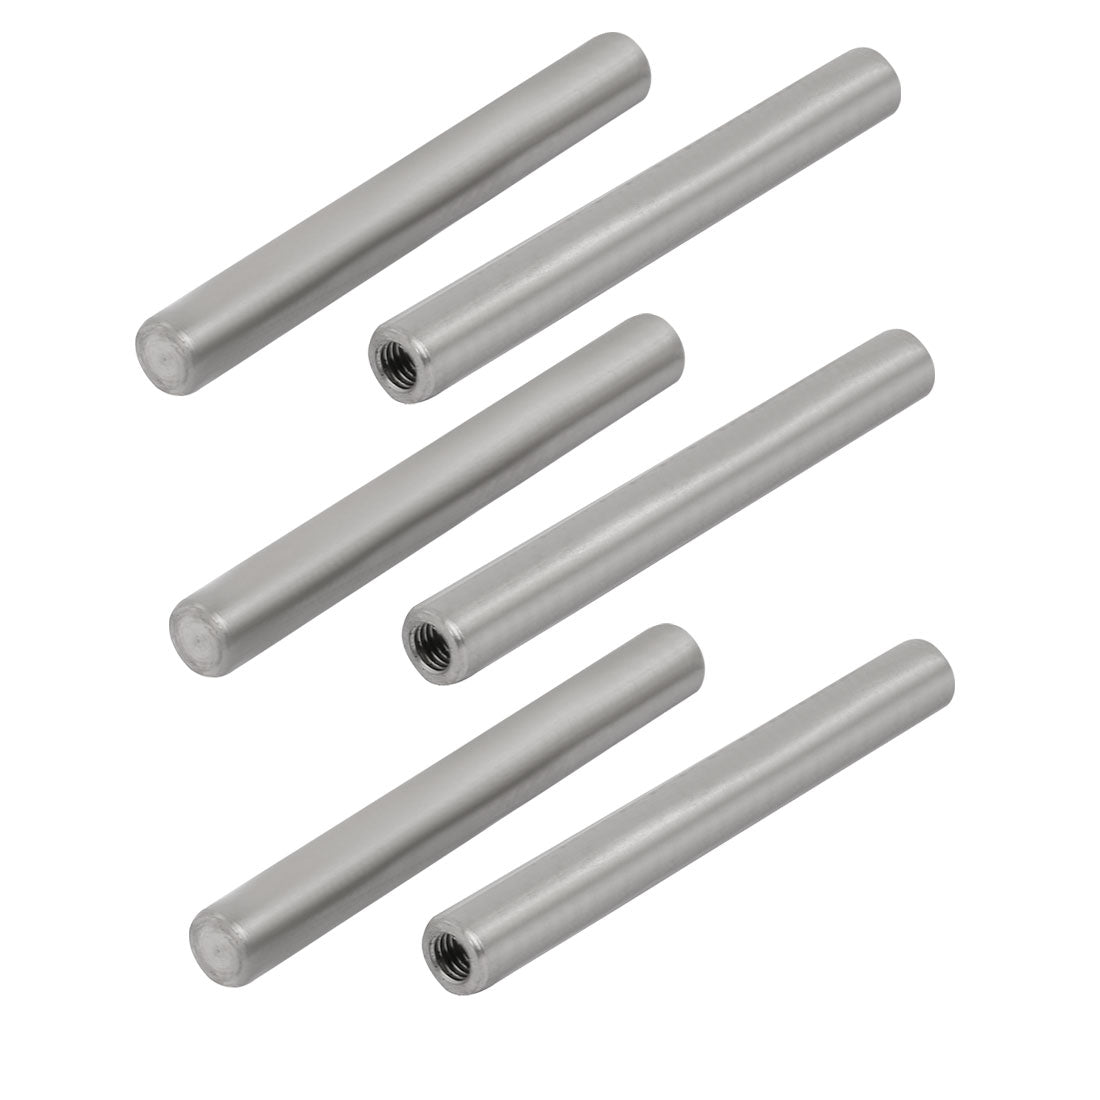 uxcell Uxcell 304 Stainless Steel M5 Female Thread 8mm x 70mm Cylindrical Dowel Pin 6pcs